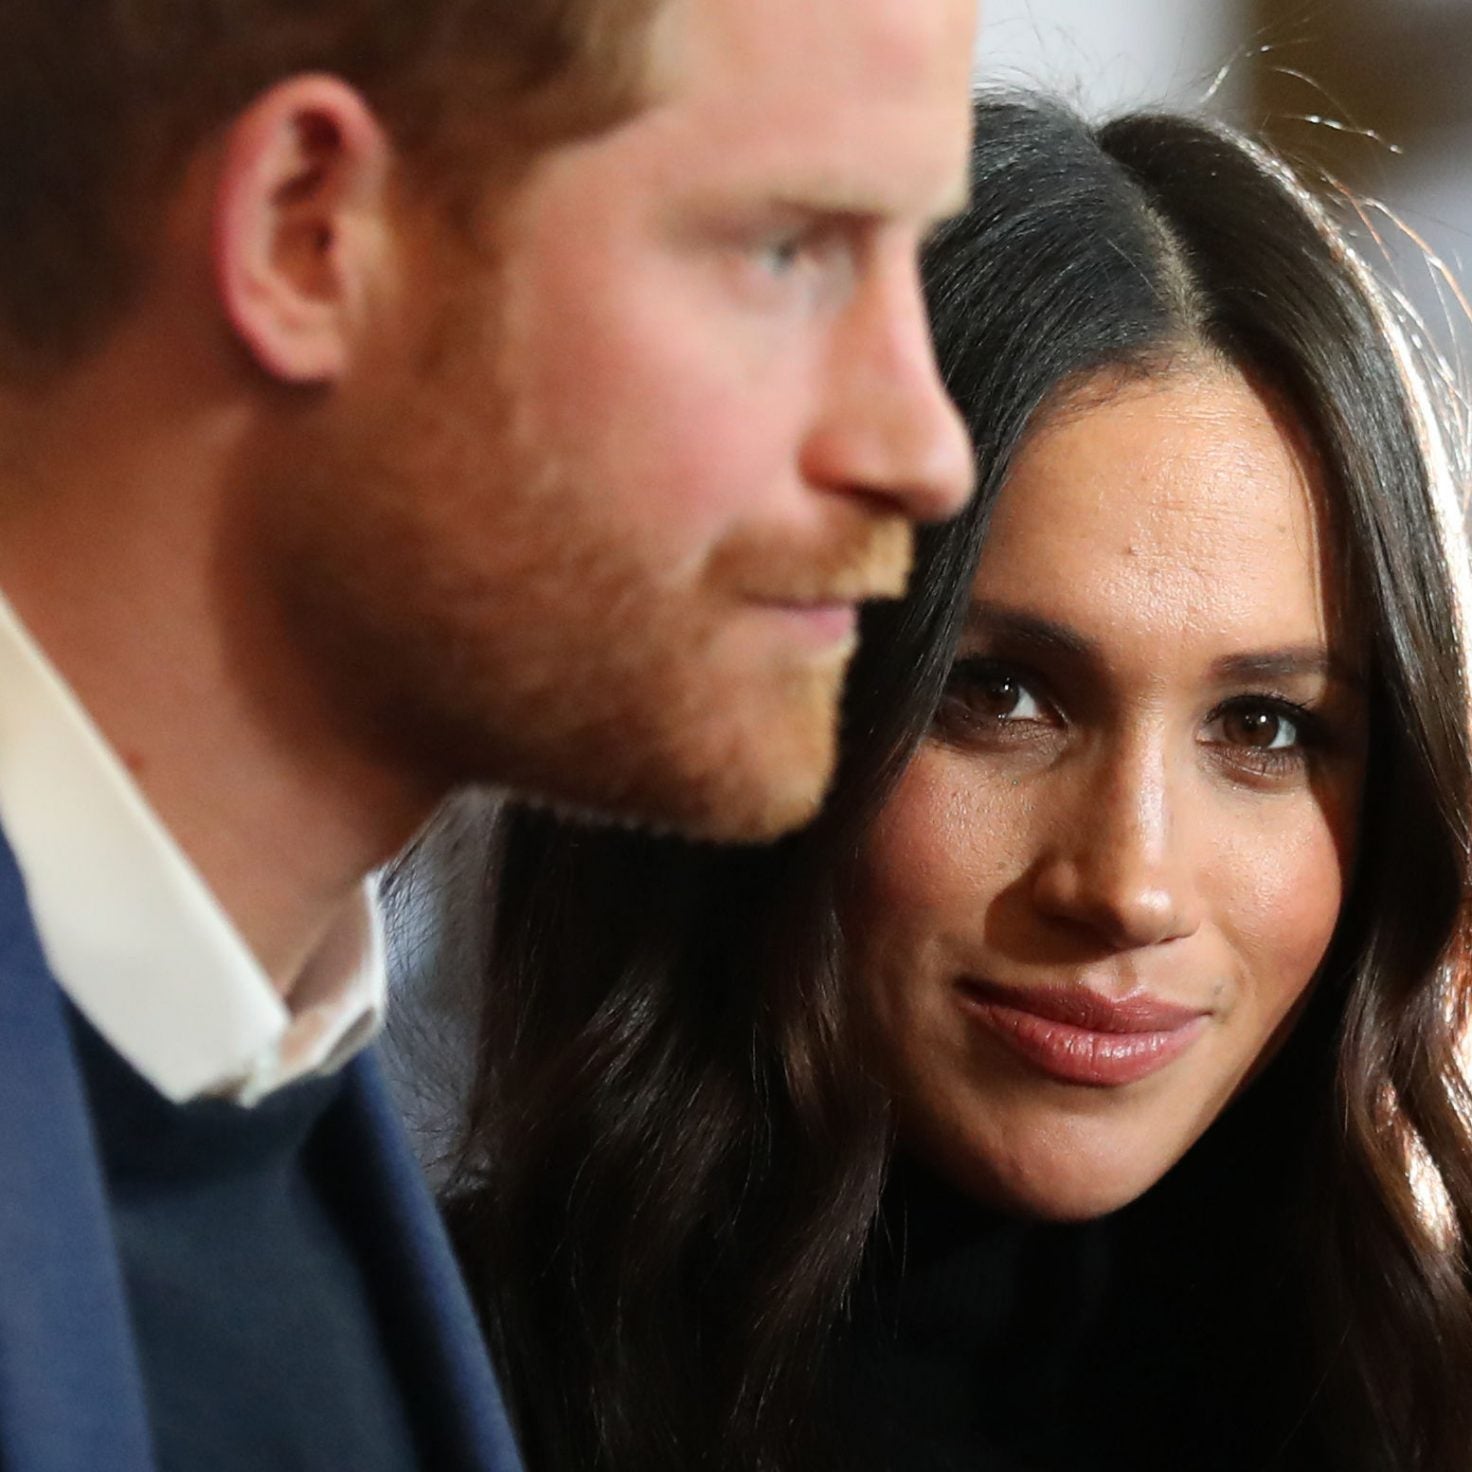 Relationship Expert Tracy McMillan Weighs In On Prince Harry And Meghan Markle's Royal Exit